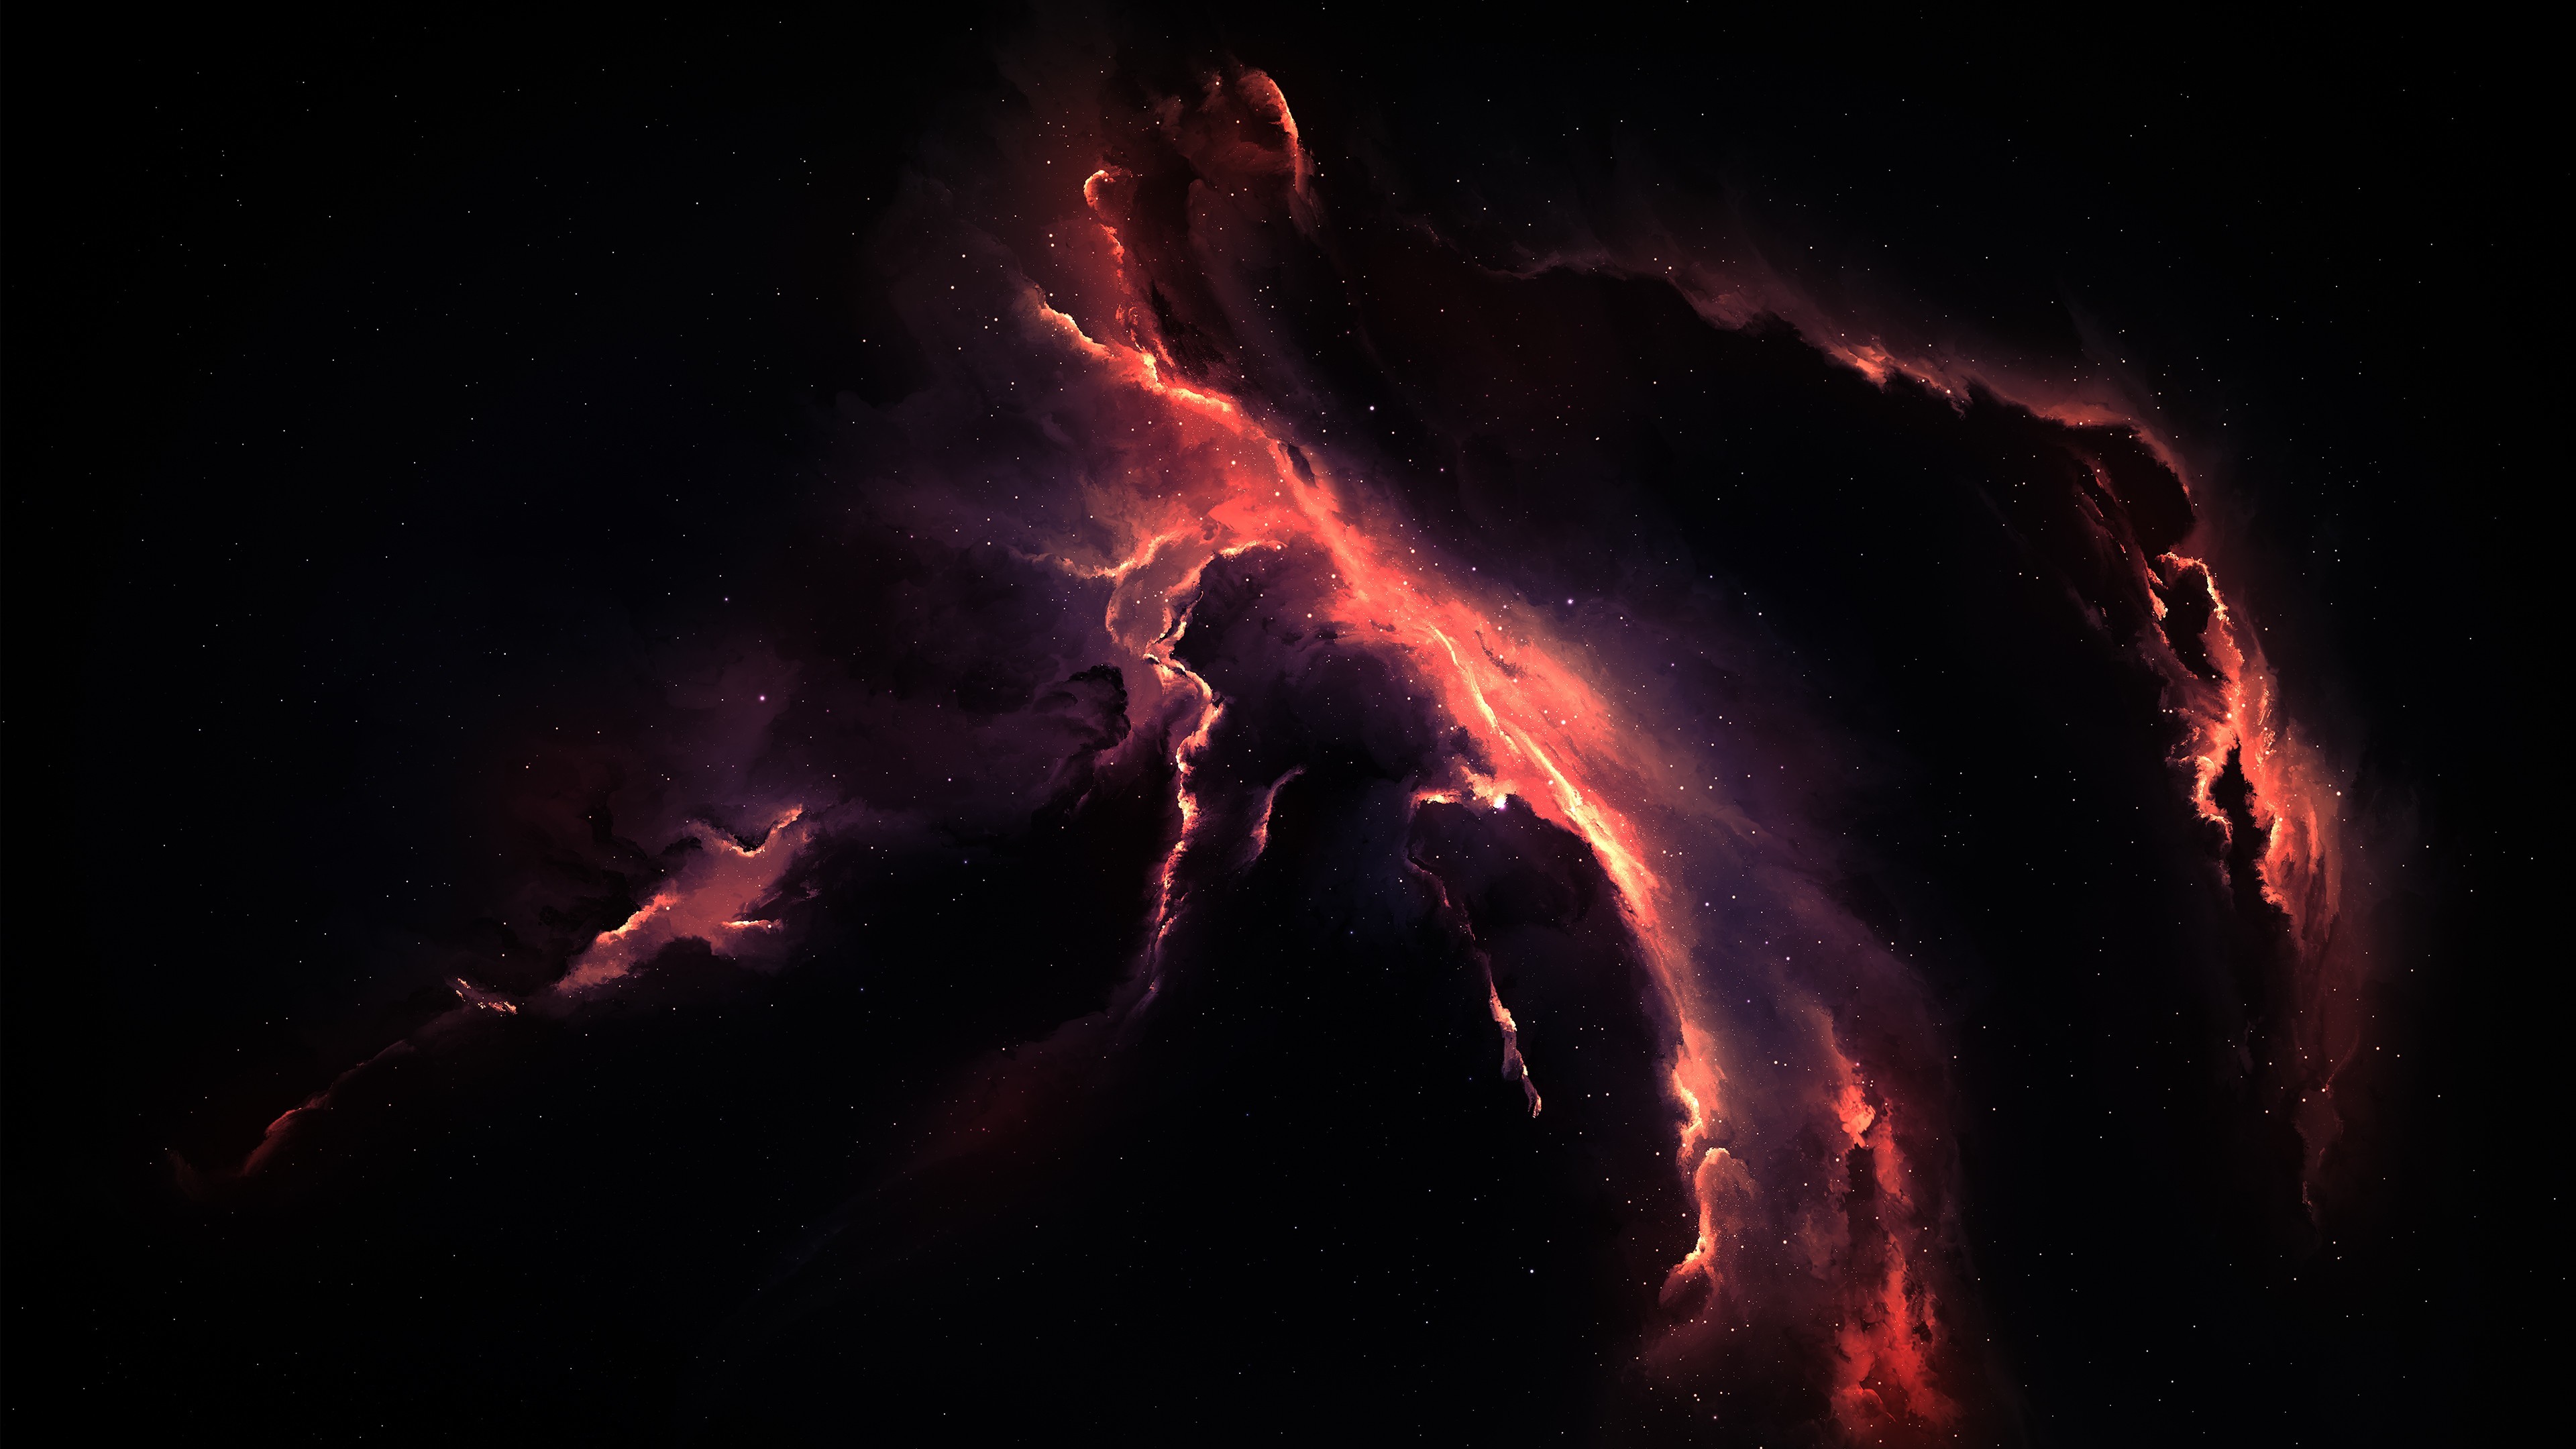 4k Space Wallpaper 48 Images 2146